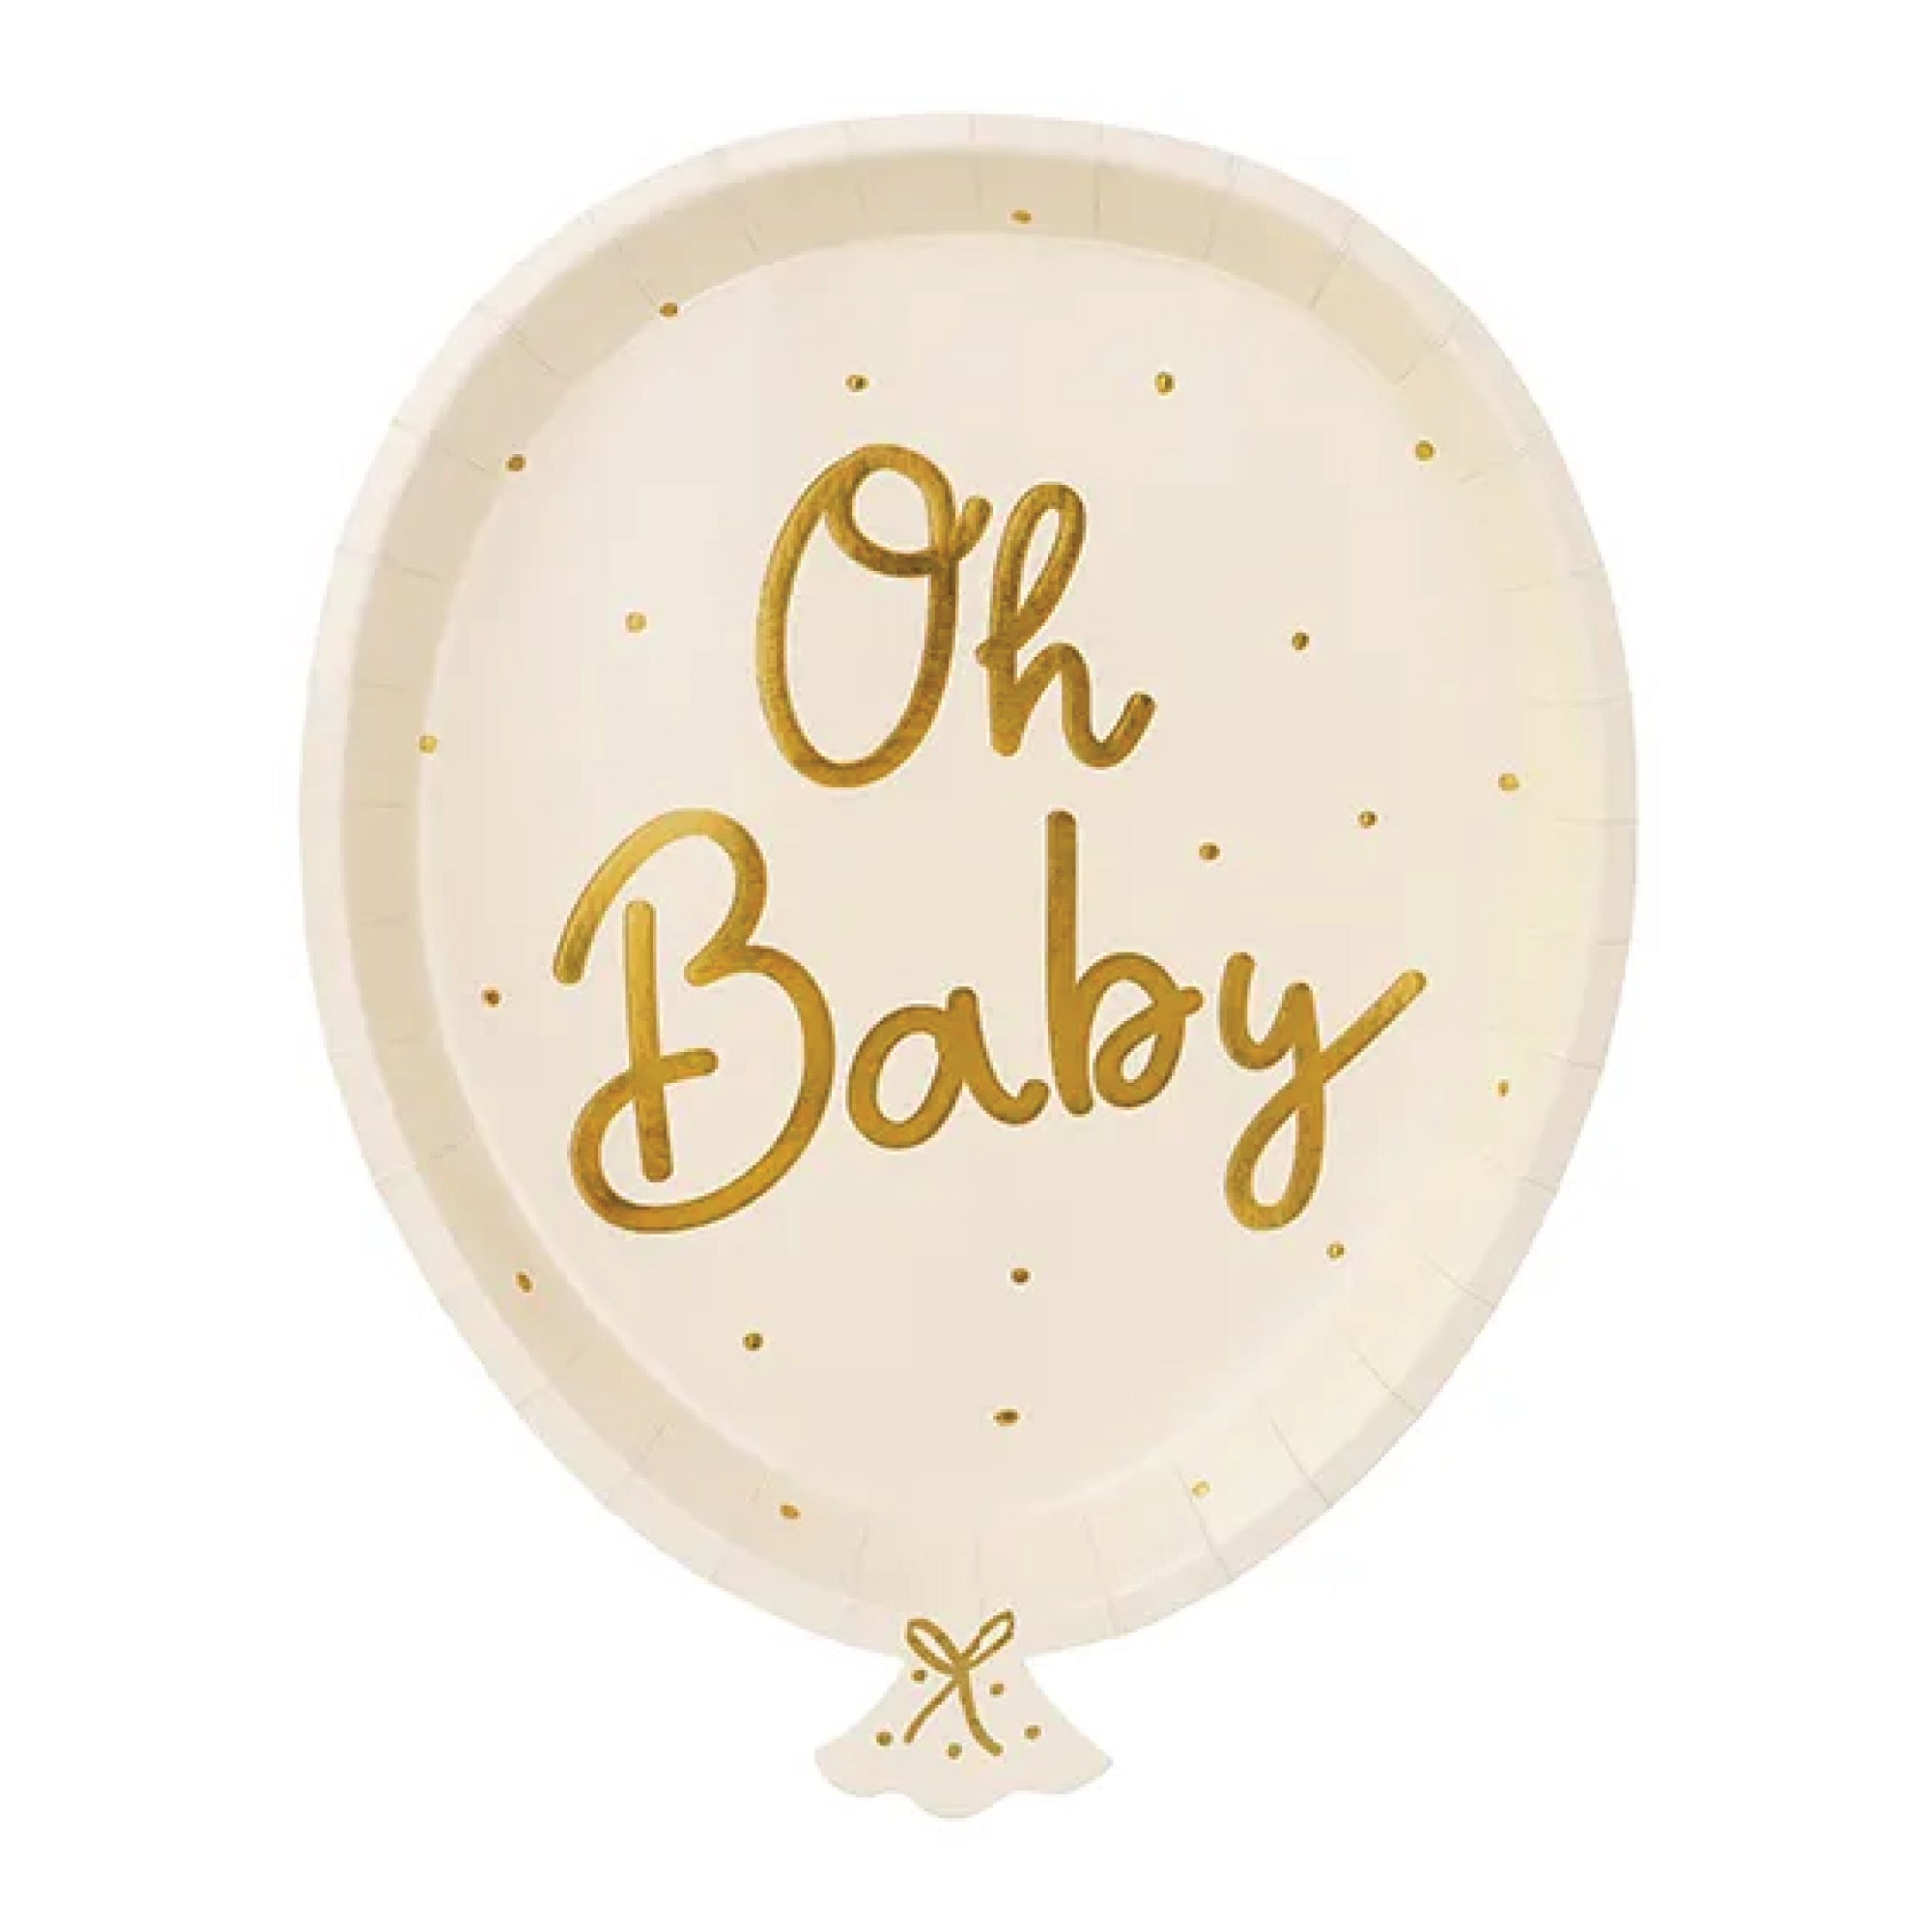 Oh Baby Shower Balloon Lunch Plates 6ct